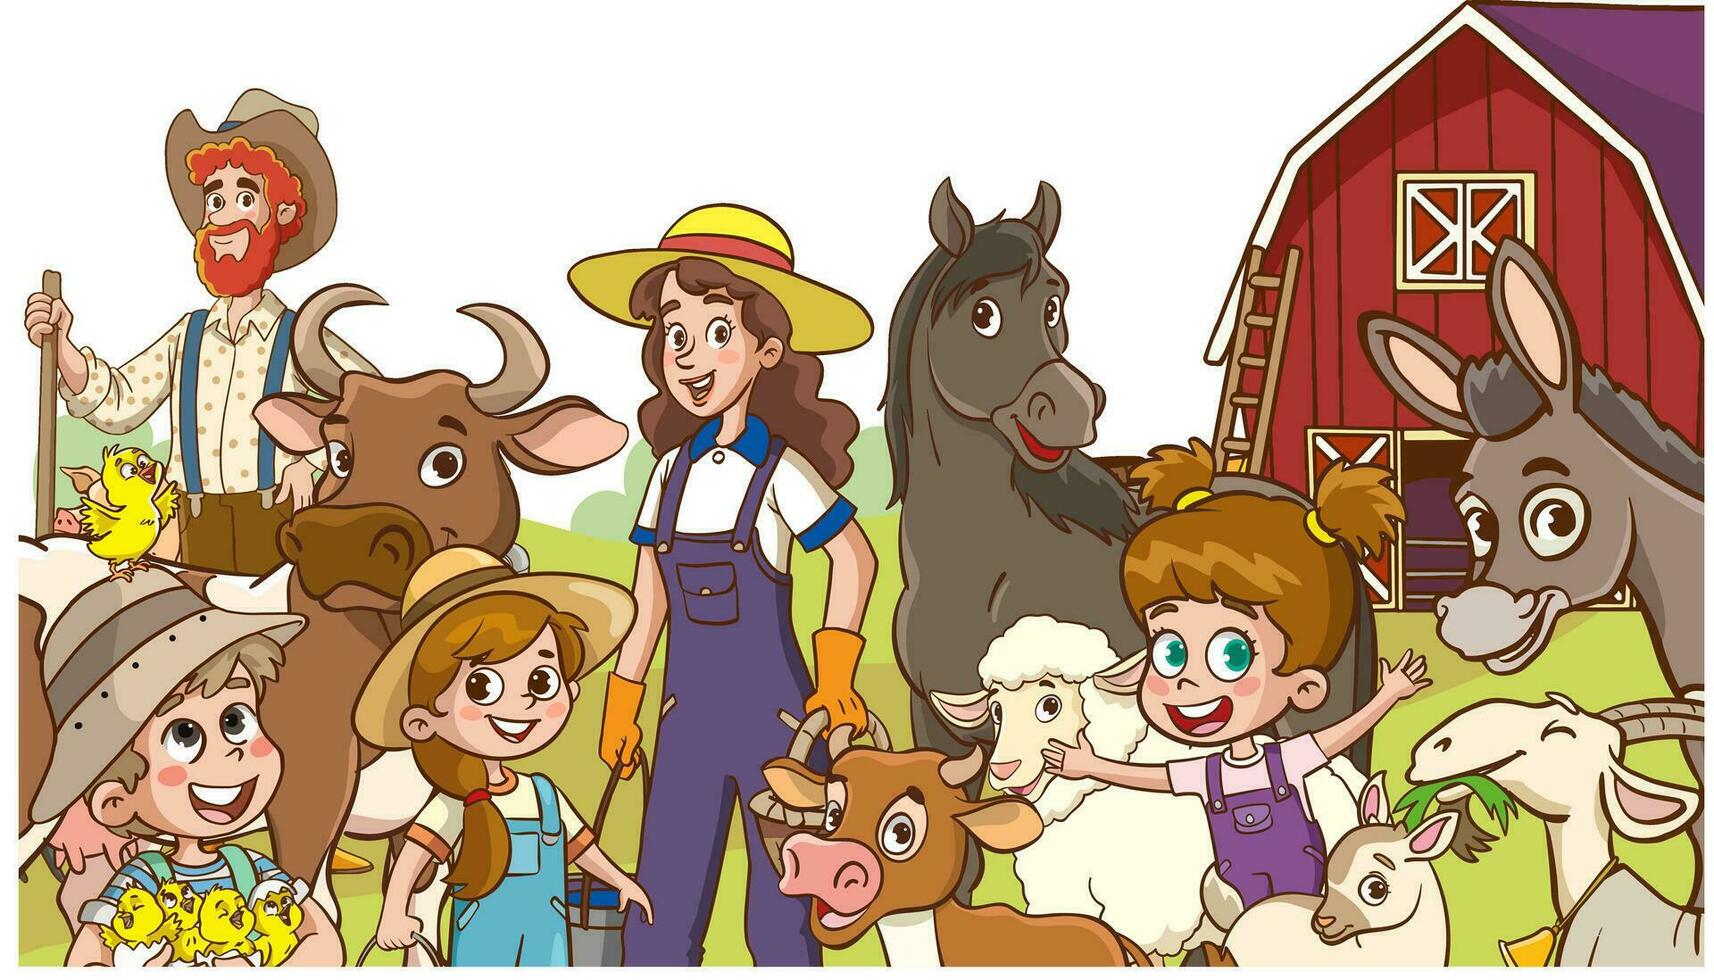 Illustration of a Group of Farm Kids and their Farm Animal Characters vector